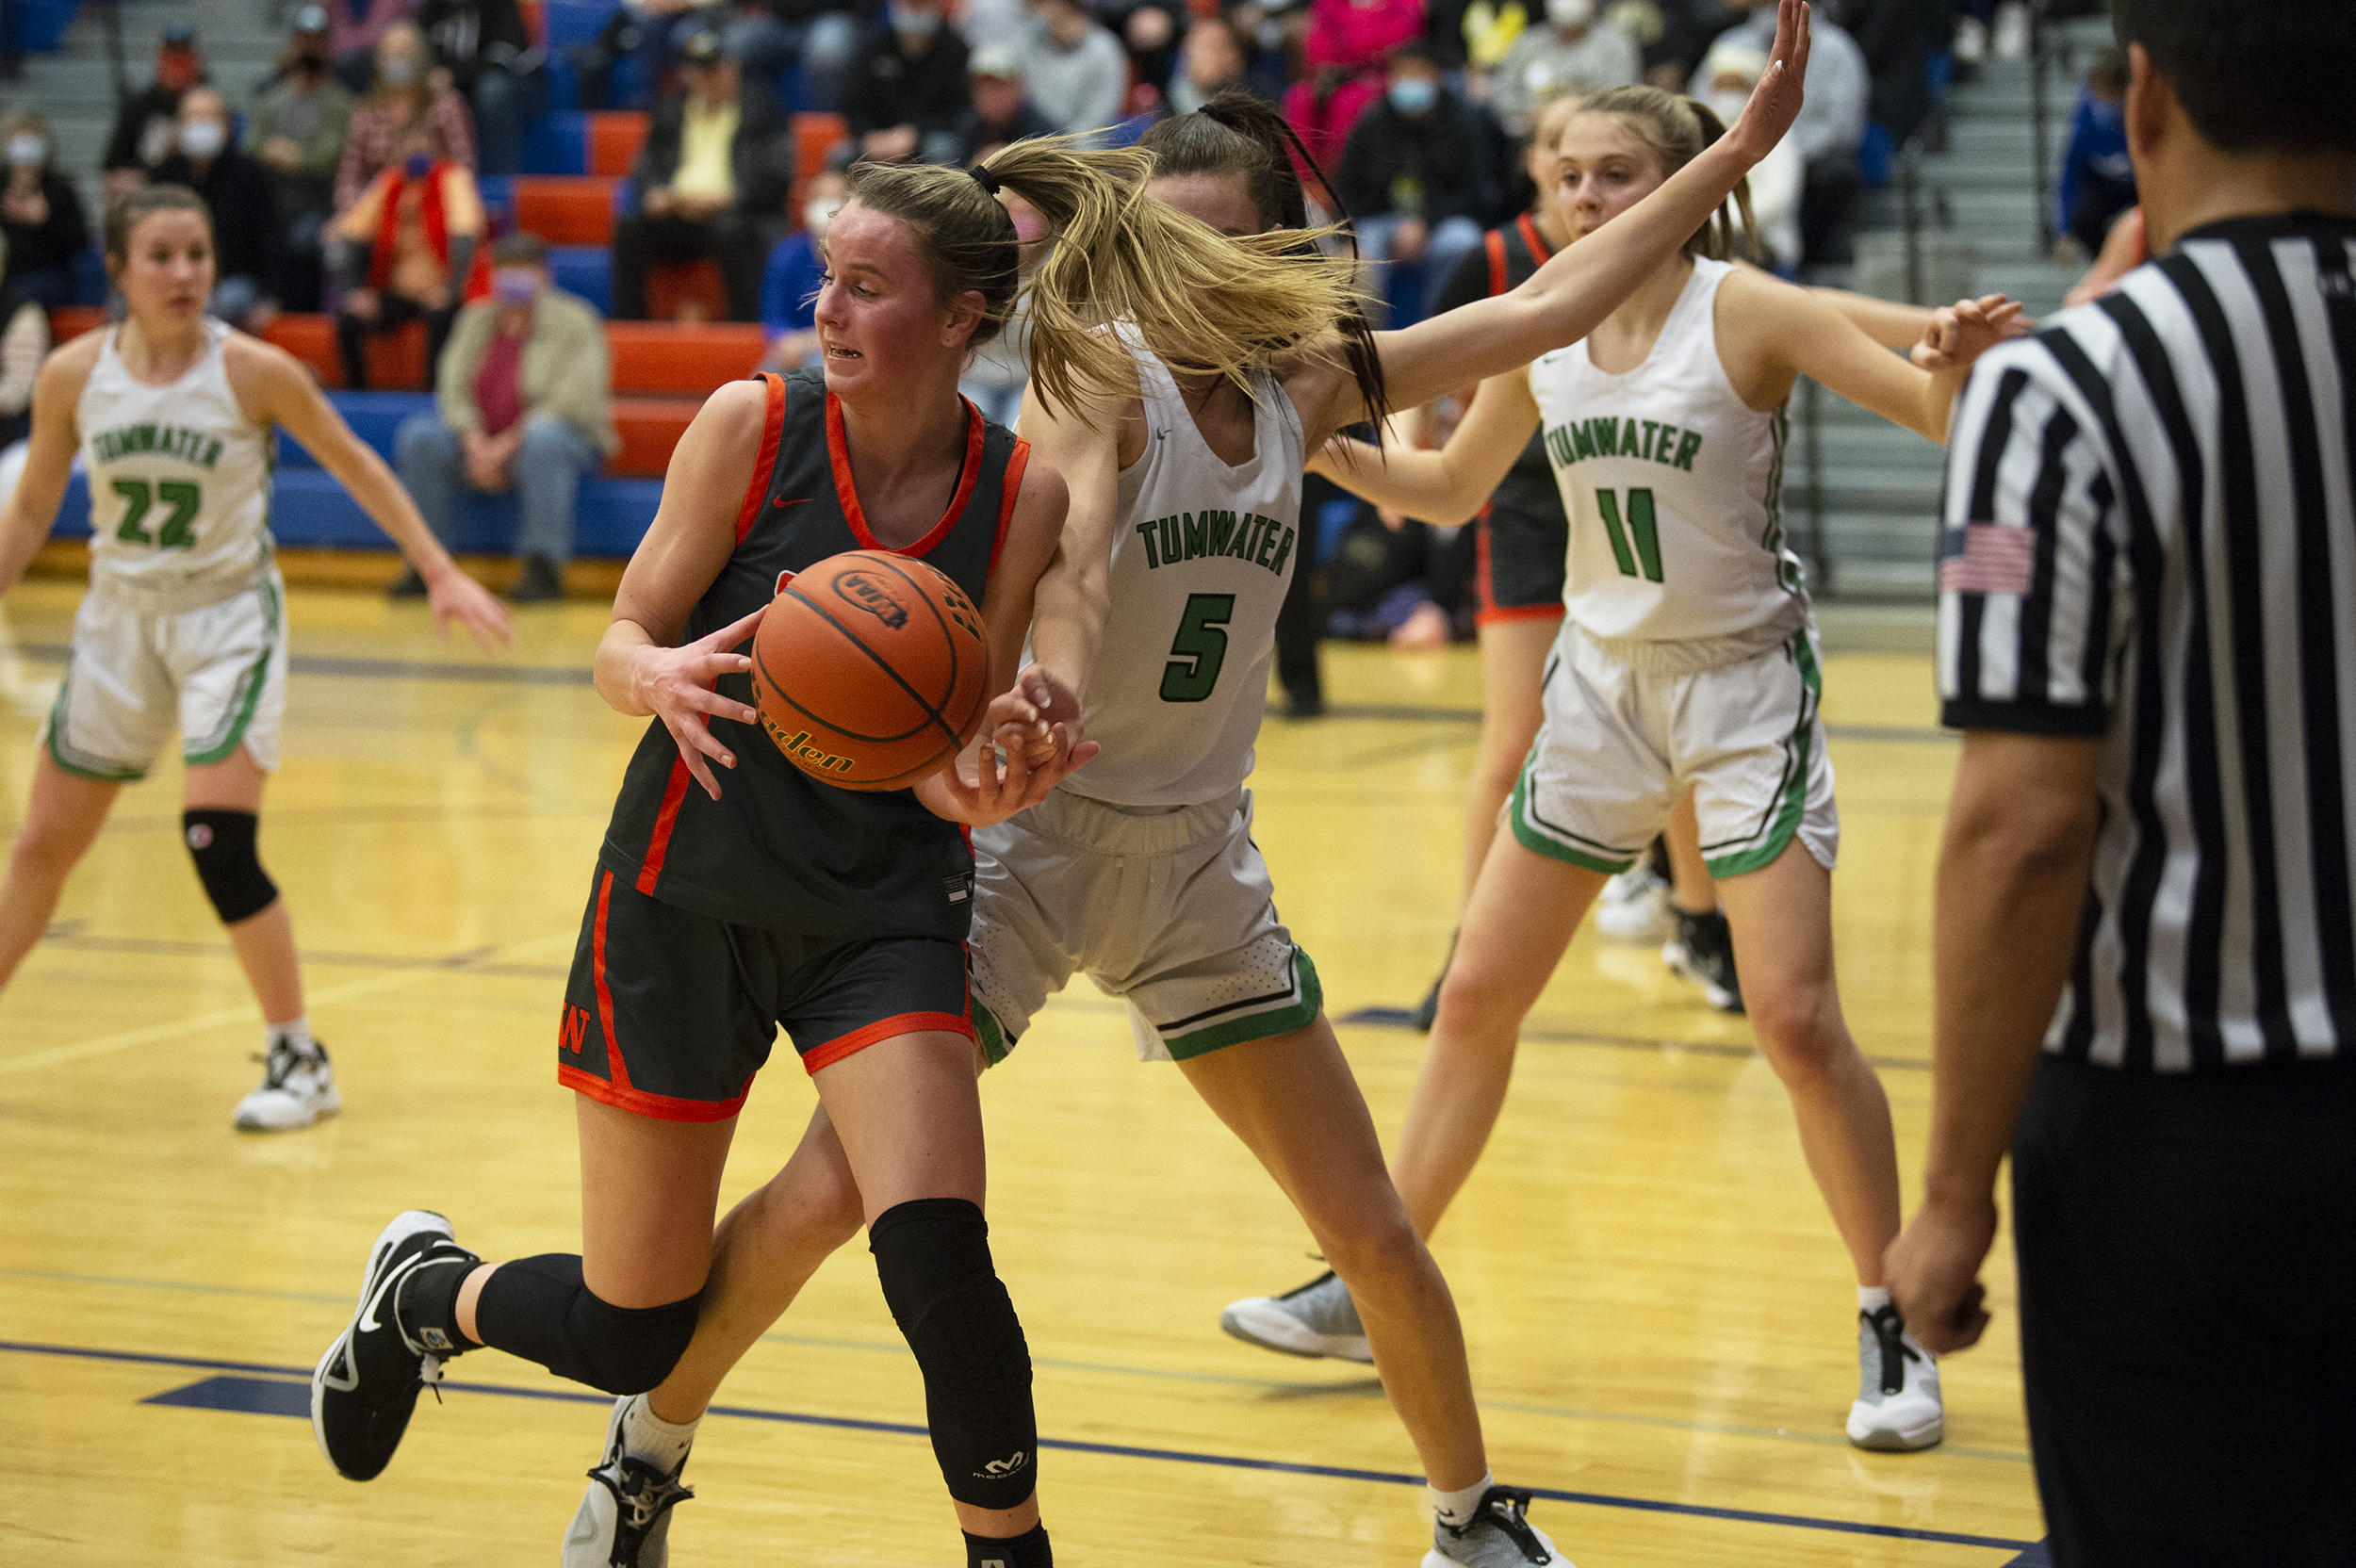 Washougal's Jaiden Bea bobbles the ball while being defended by Tumwater's Natalie Sumrok during the 2A girls basketball district semifinal at Ridgefield High School (Tim Martinez/The Columbian)